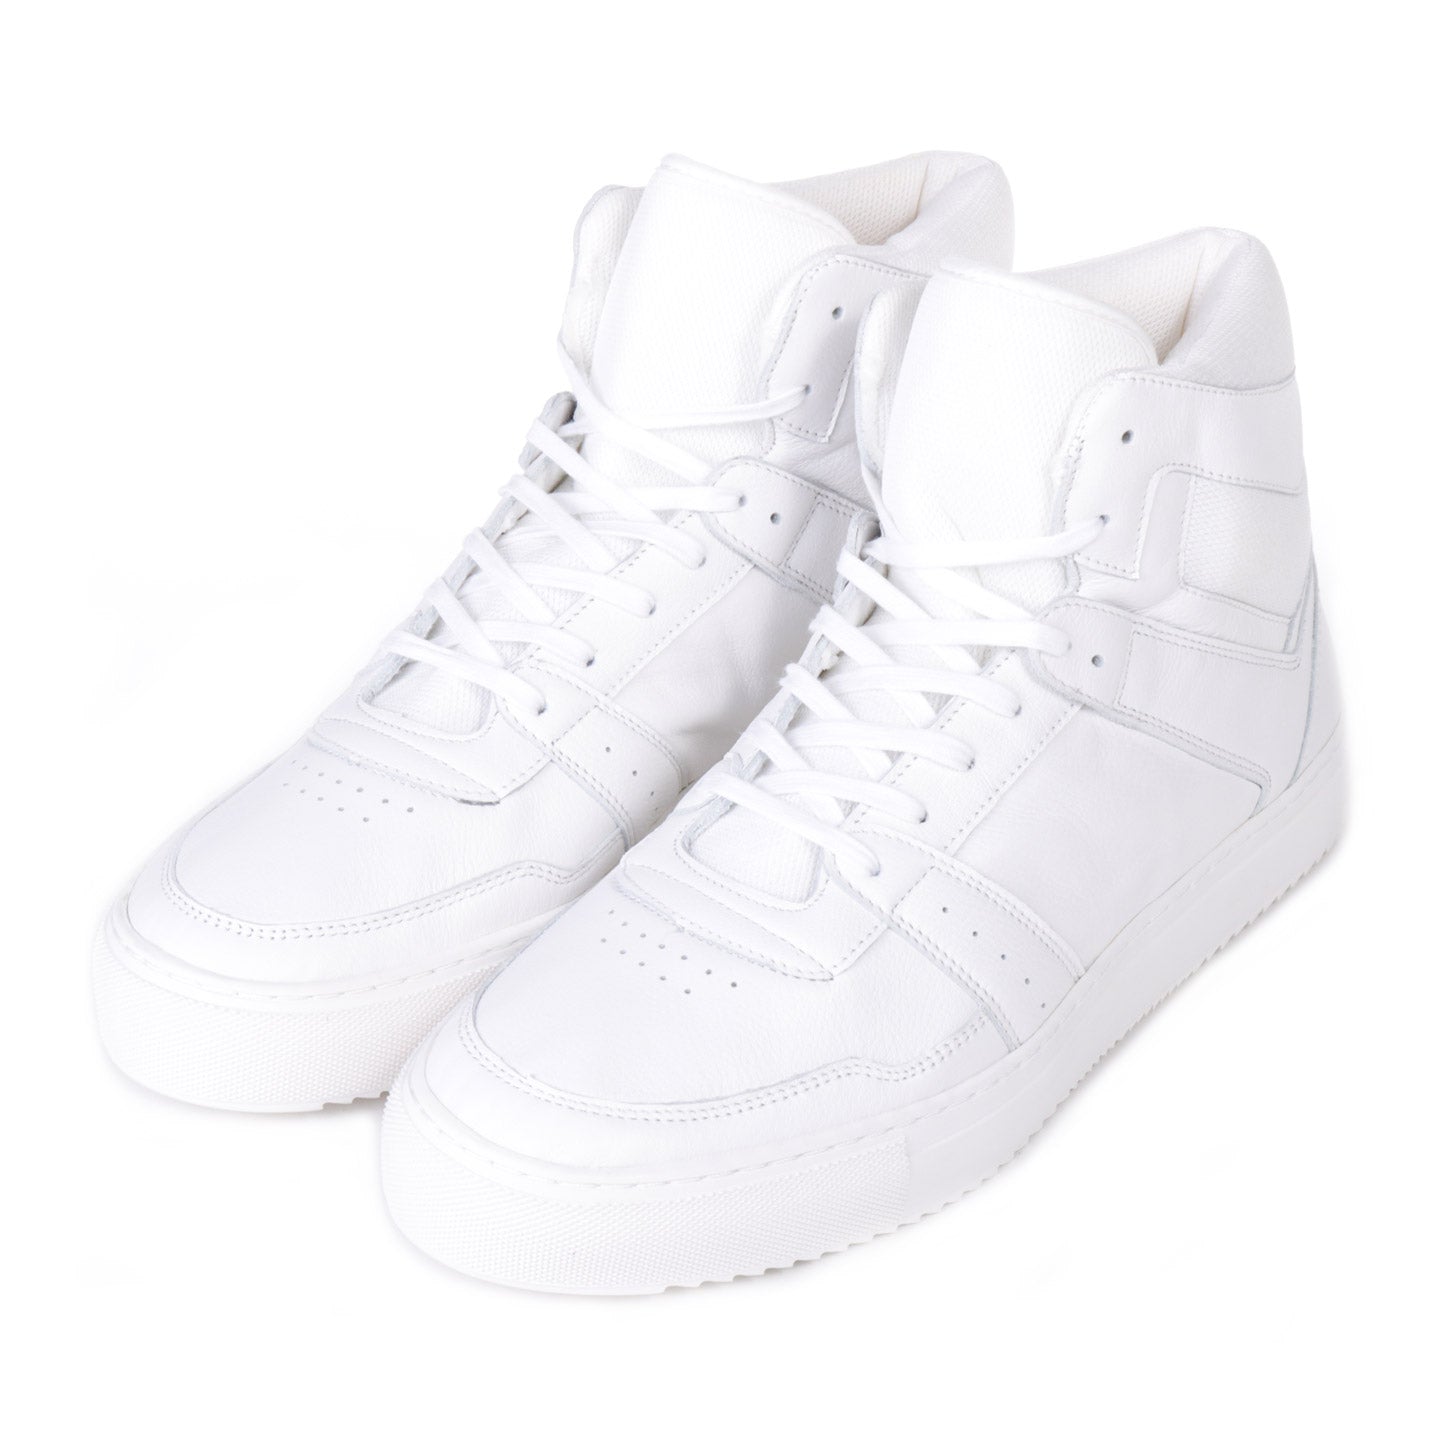 REPRODUCTION OF FOUND ITALIAN MILITARY TRAINER WHITE | TODAY CLOTHING